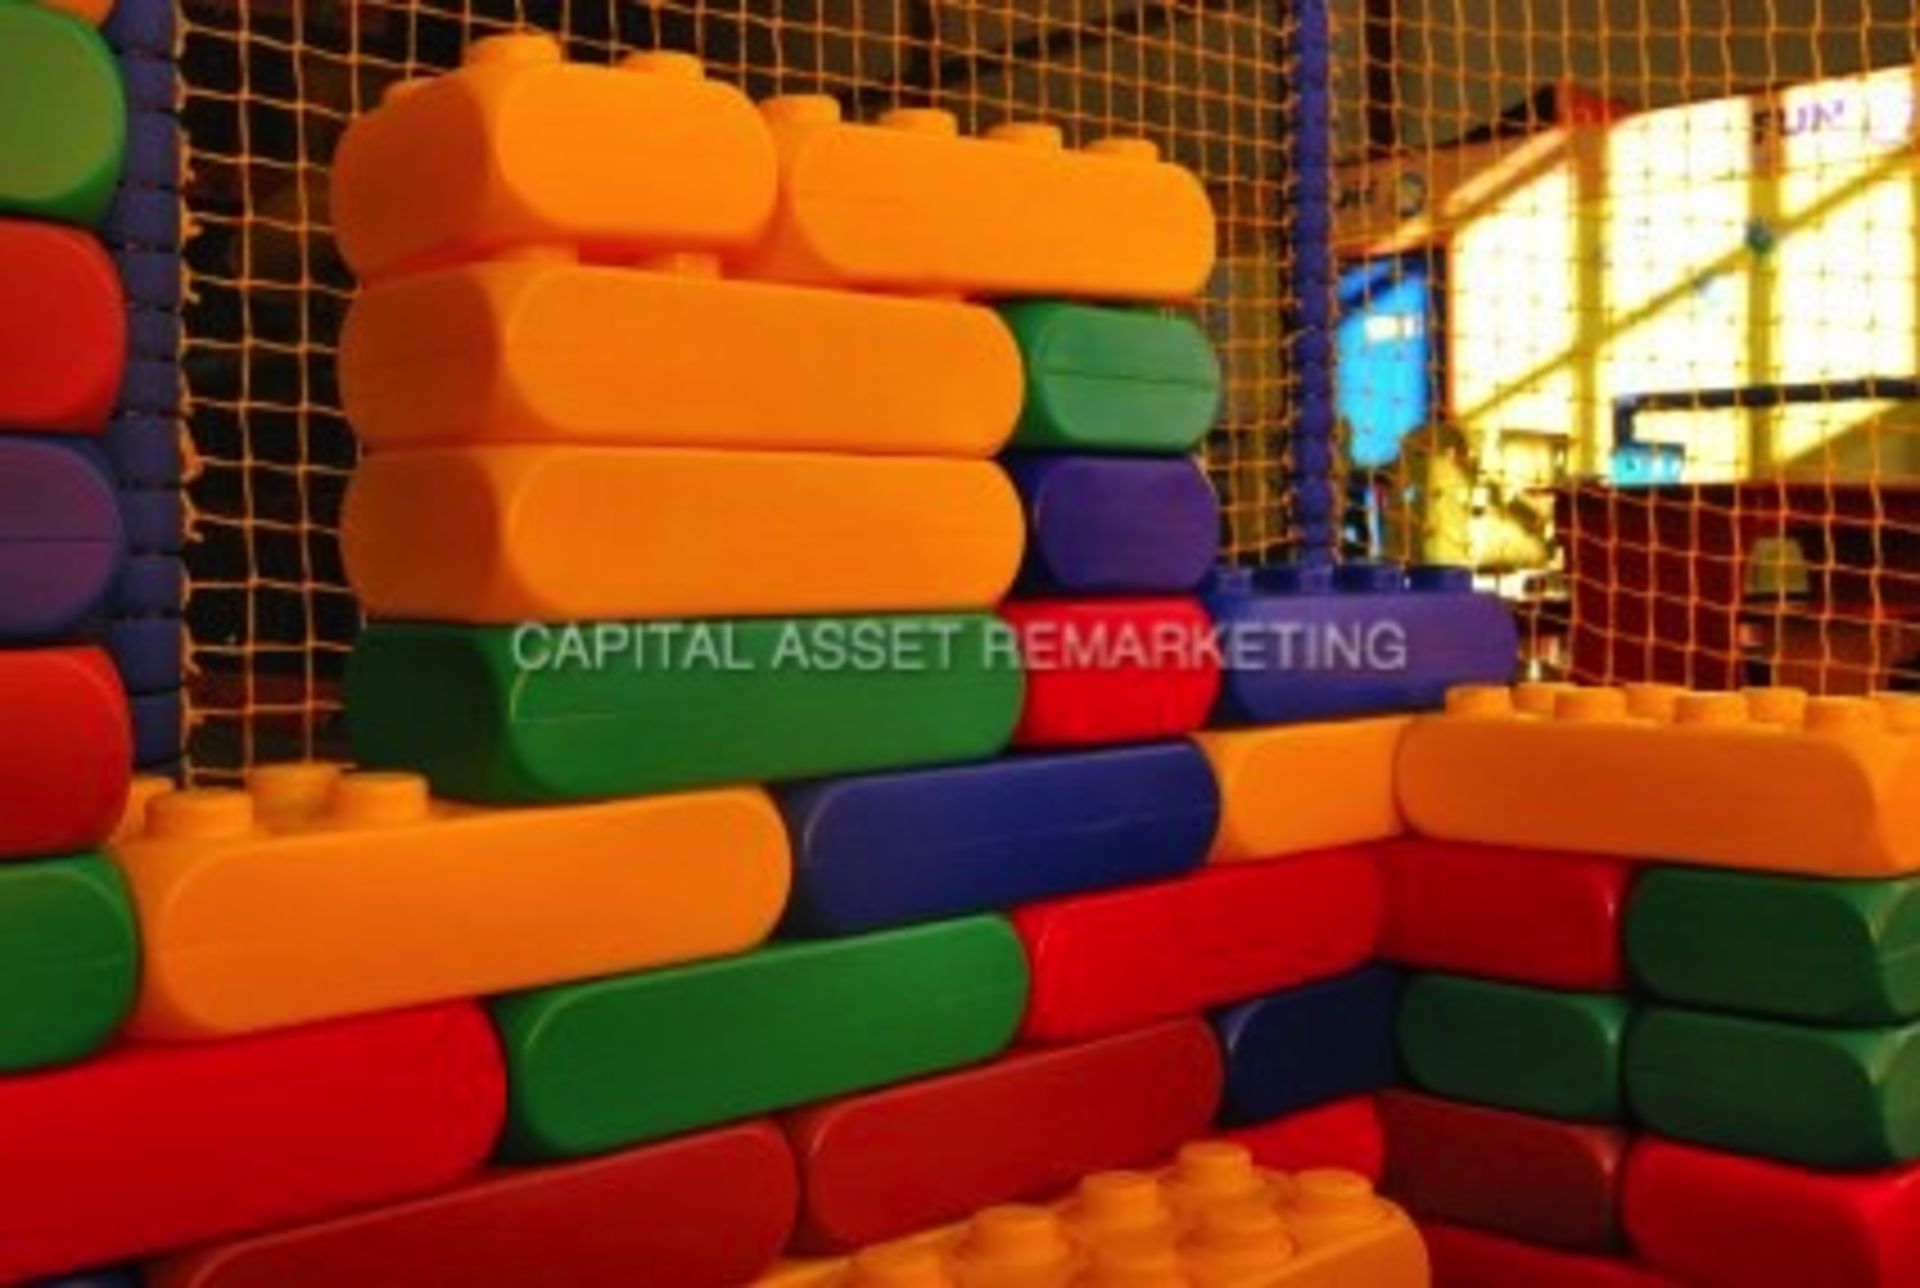 ESDA Giant Lego for playcentres day nurseries & playgroups or home play made in Germany,GREAT FUN!!! - Image 2 of 3